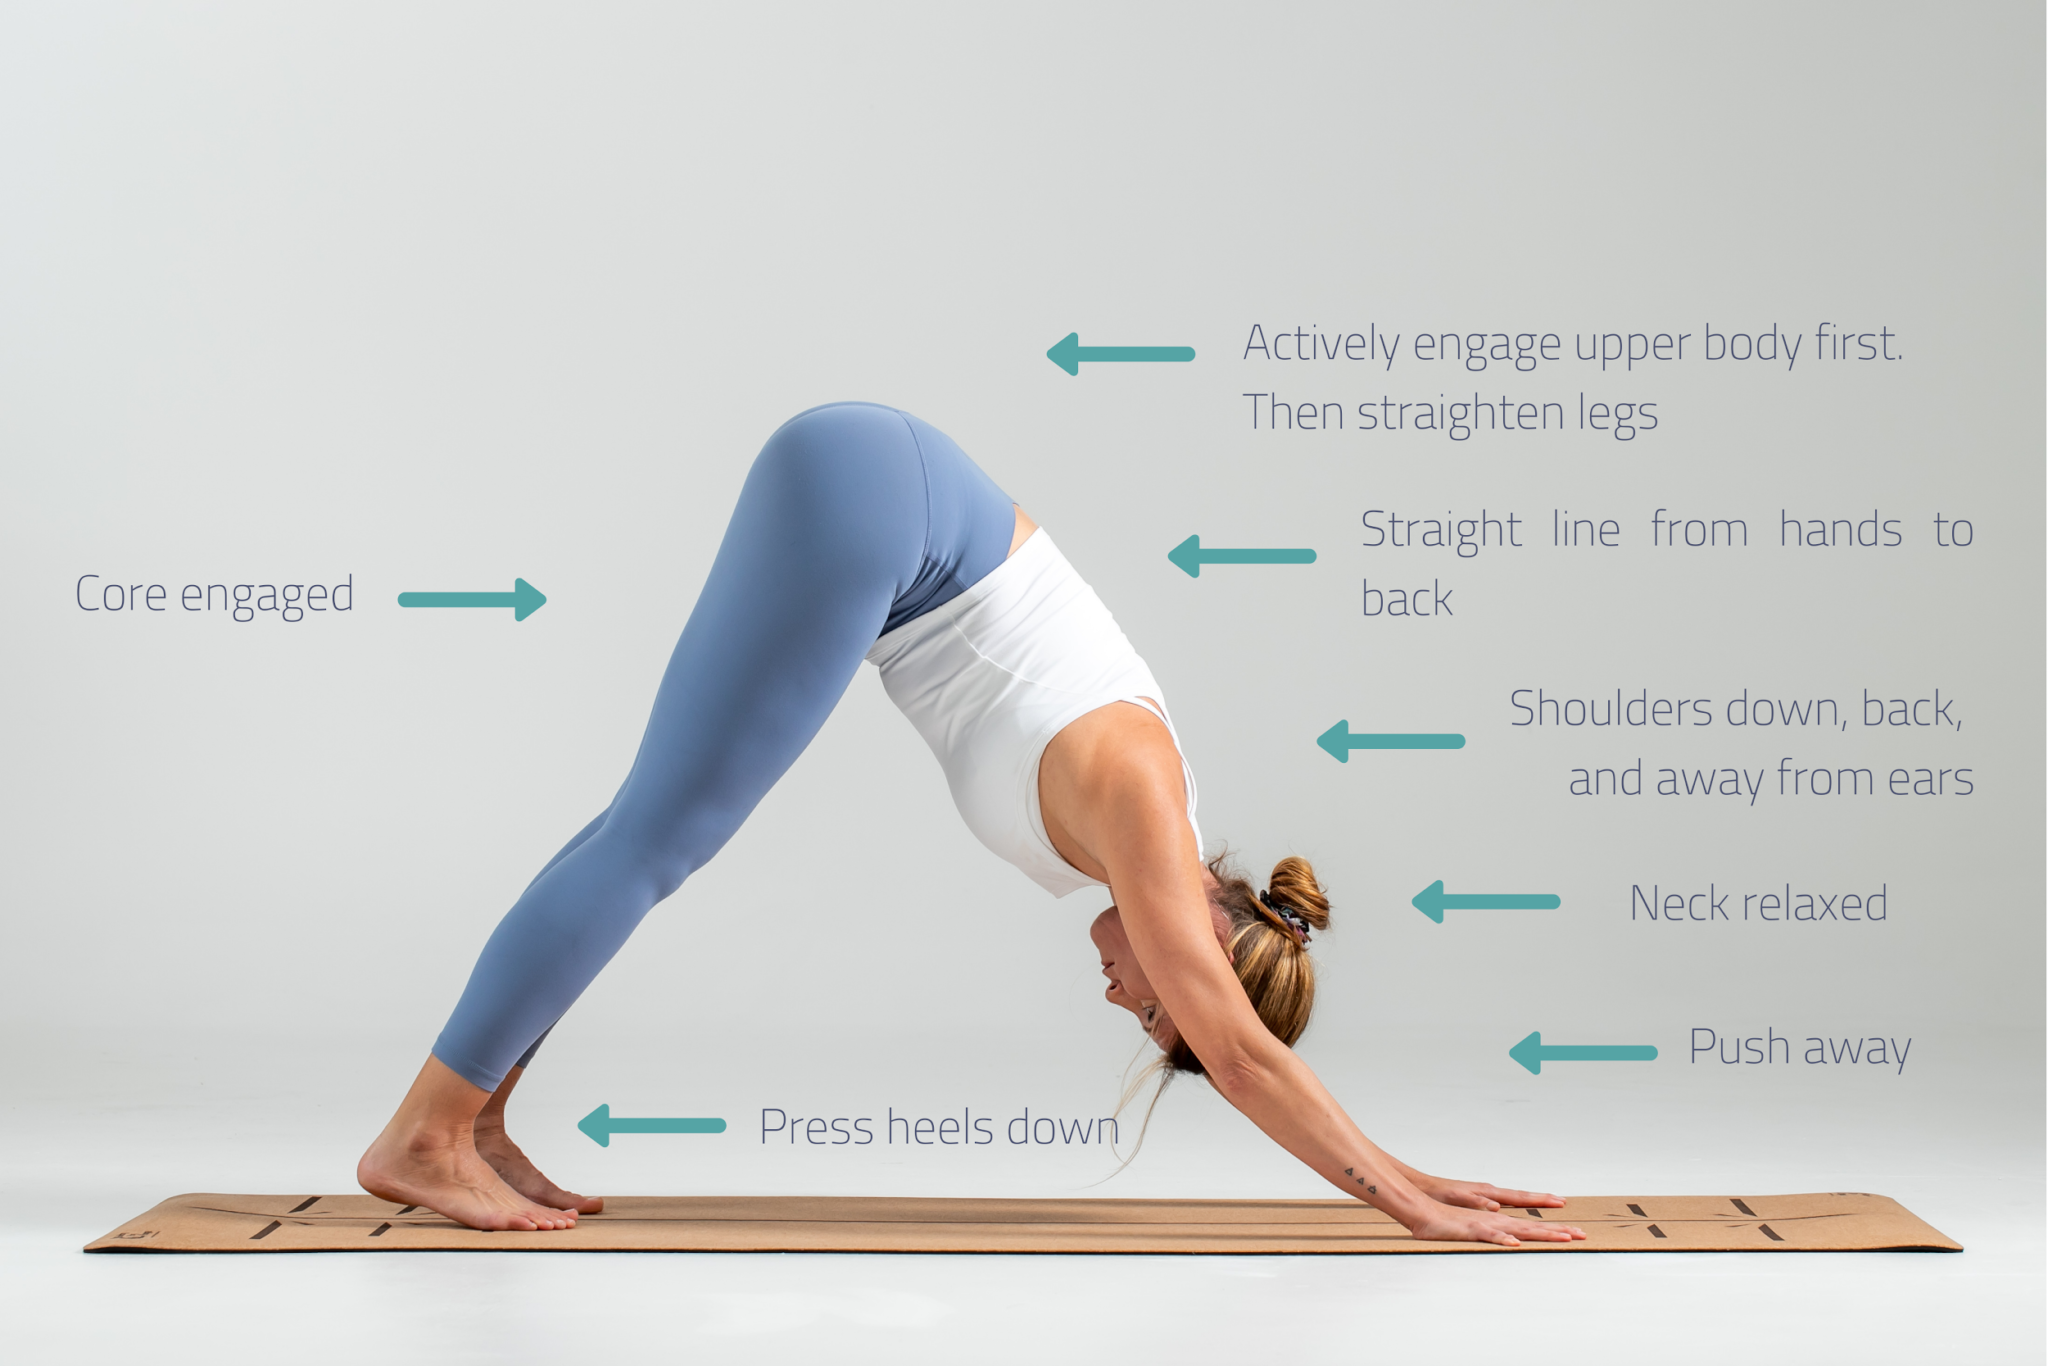 Downward Dog Pose For Beginners: Step by Step Guide, Modifications, and ...